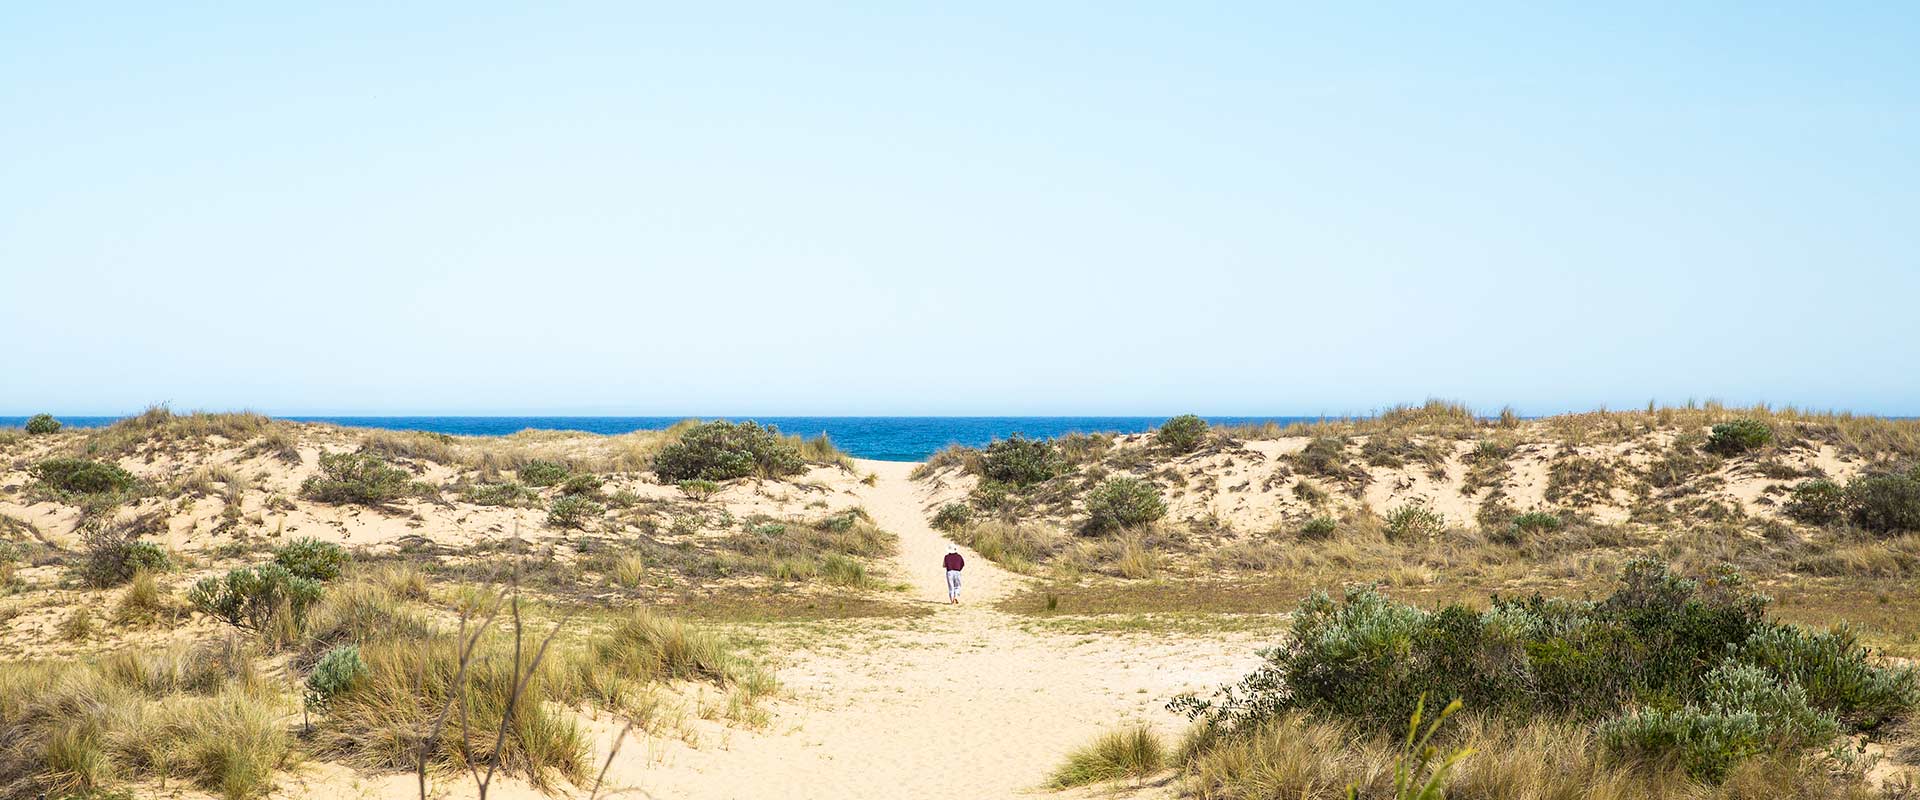 A person walks up a sandy path and through grass covered dunes towards the  deep blue ocean